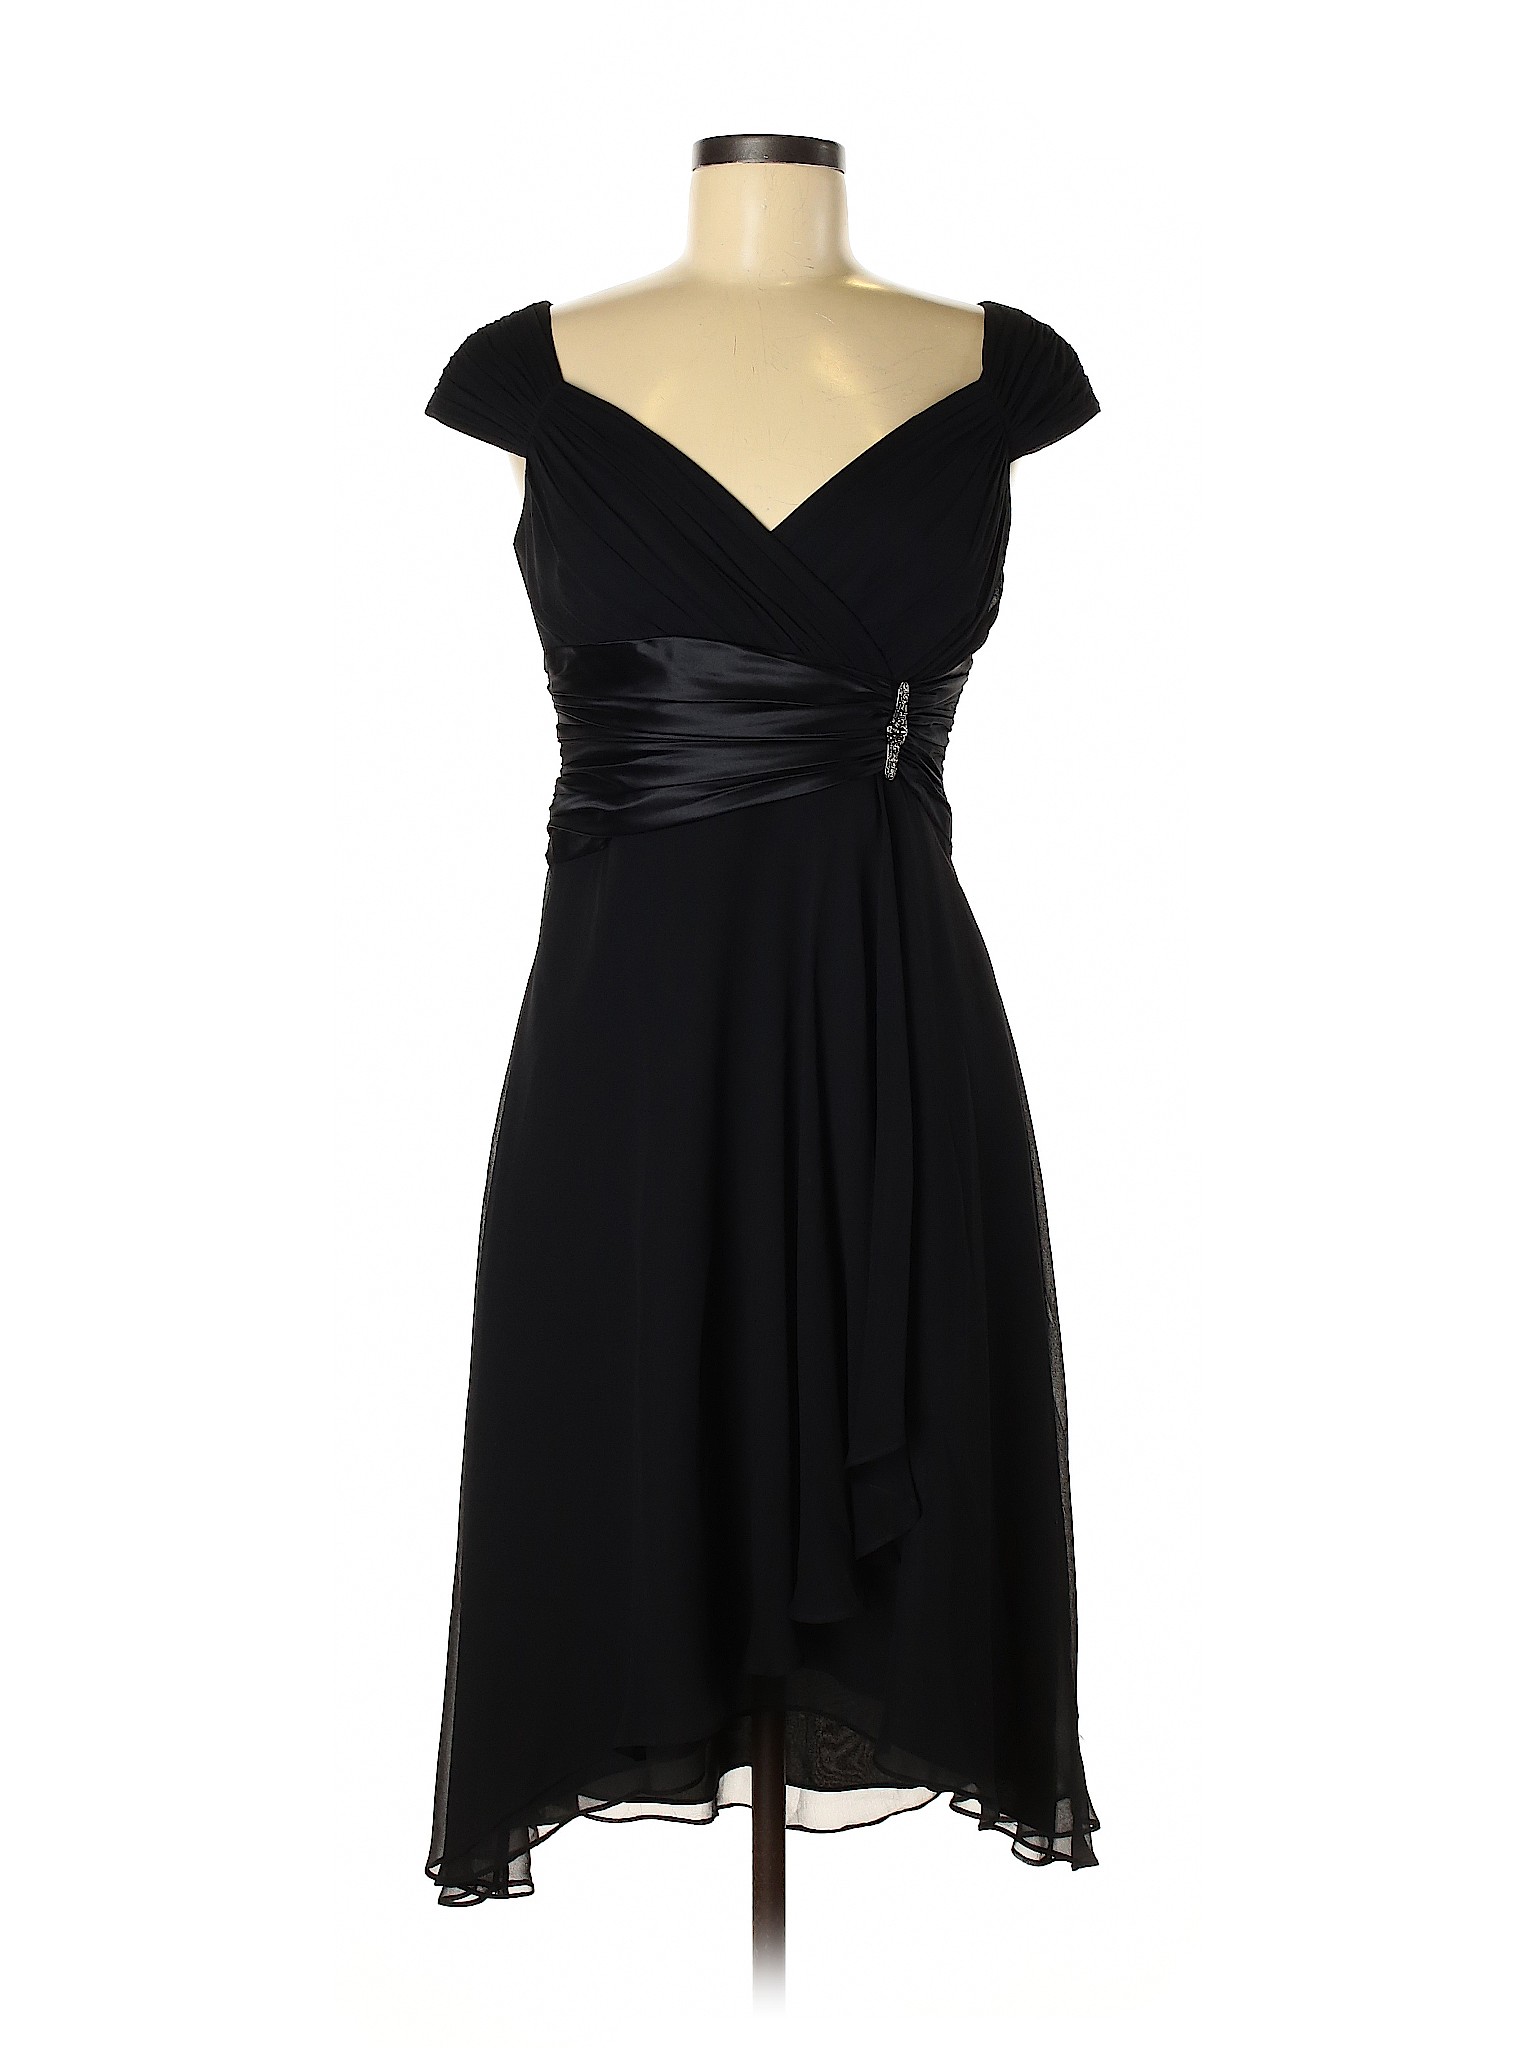 Maggy London 100% Silk Solid Black Cocktail Dress Size 8 (Petite) - 77% ...